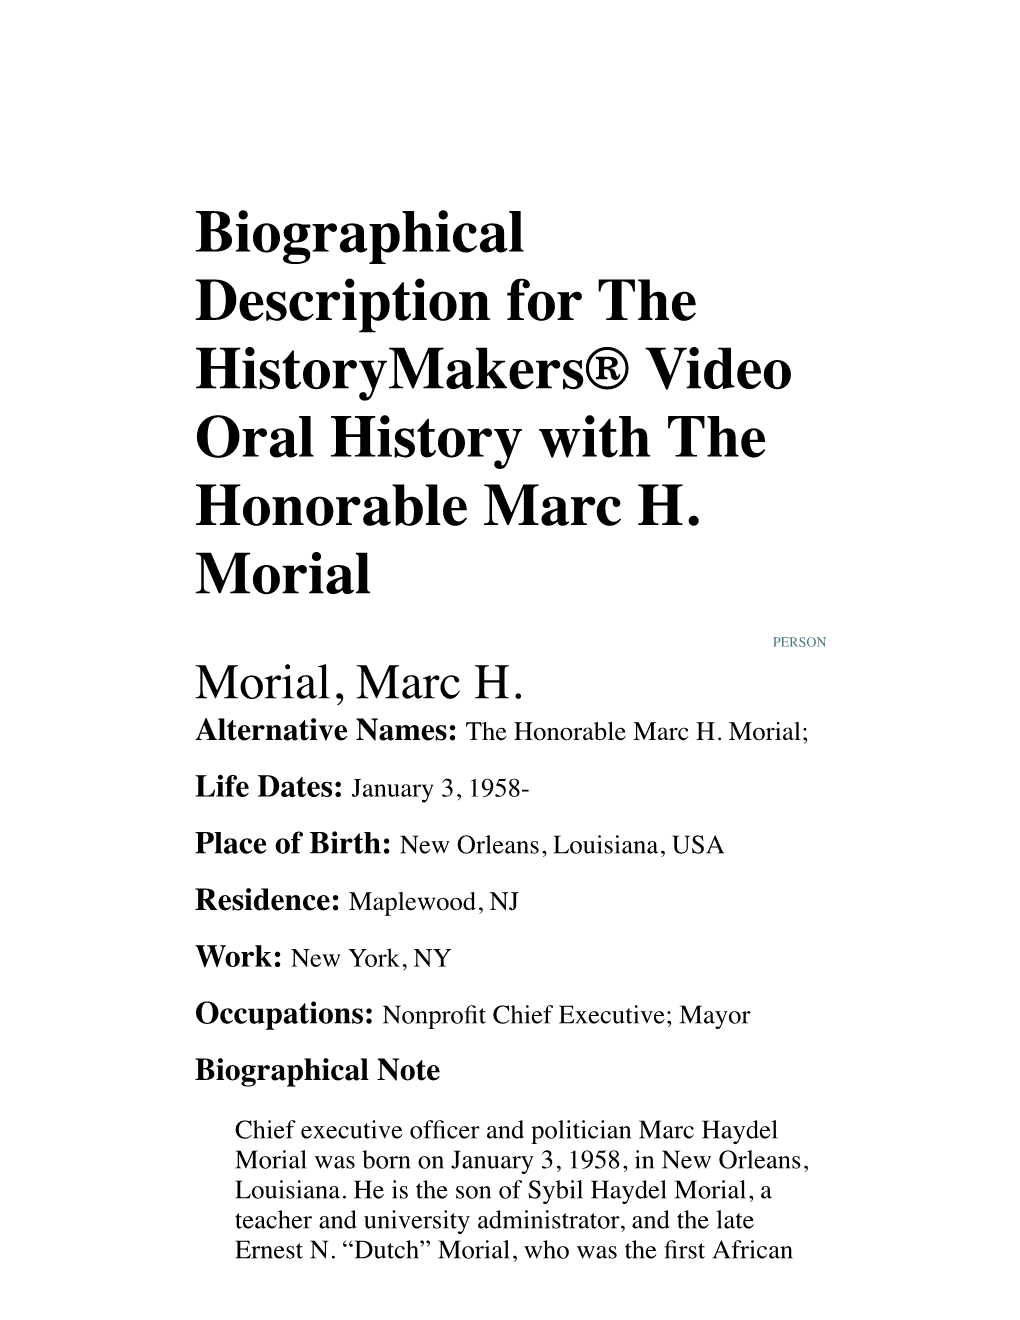 Biographical Description for the Historymakers® Video Oral History with the Honorable Marc H. Morial